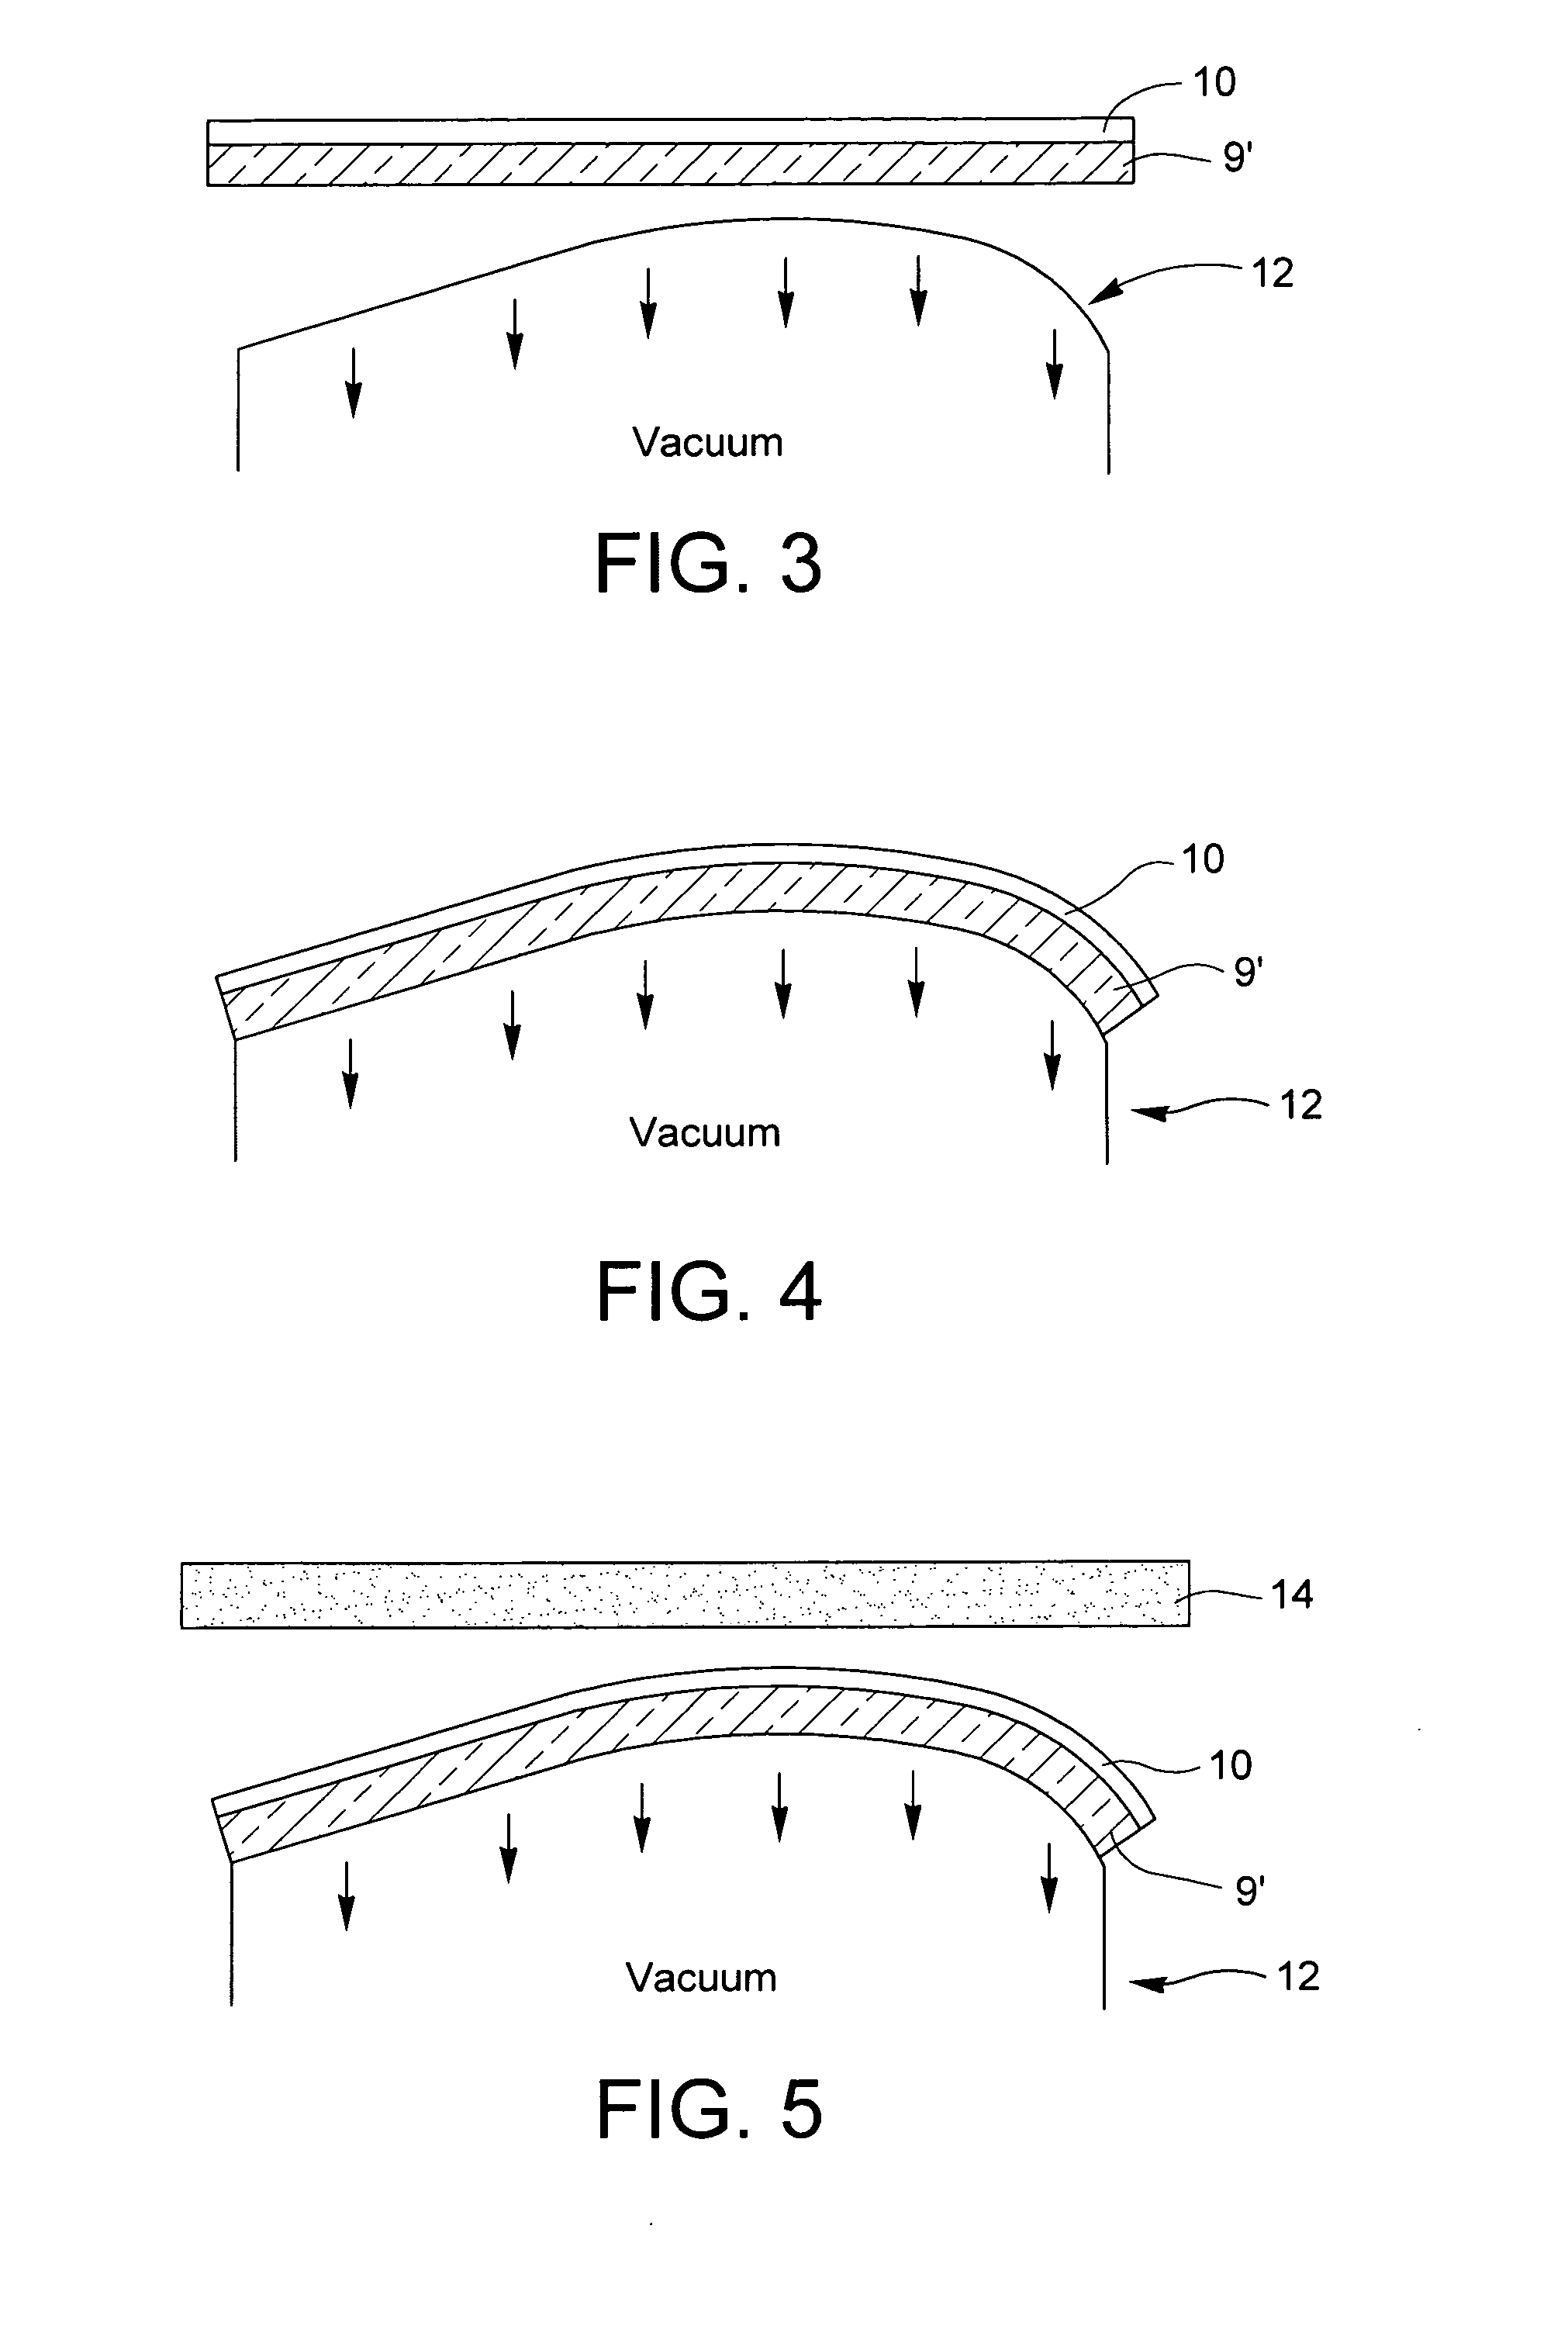 Stiffening members for reflectors used in concentrating solar power apparatus, and method of making  same